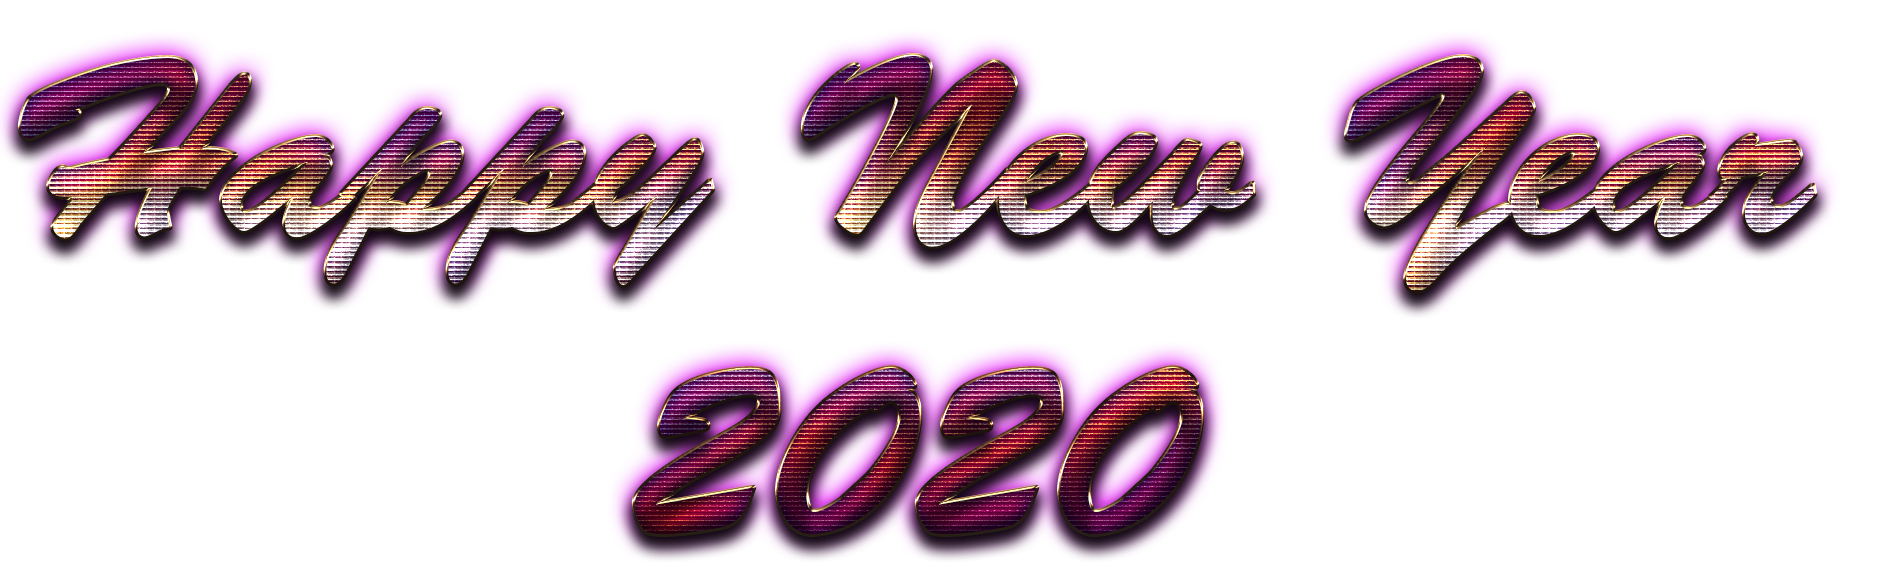 Happy New Year 2020 PNG Transparent Image